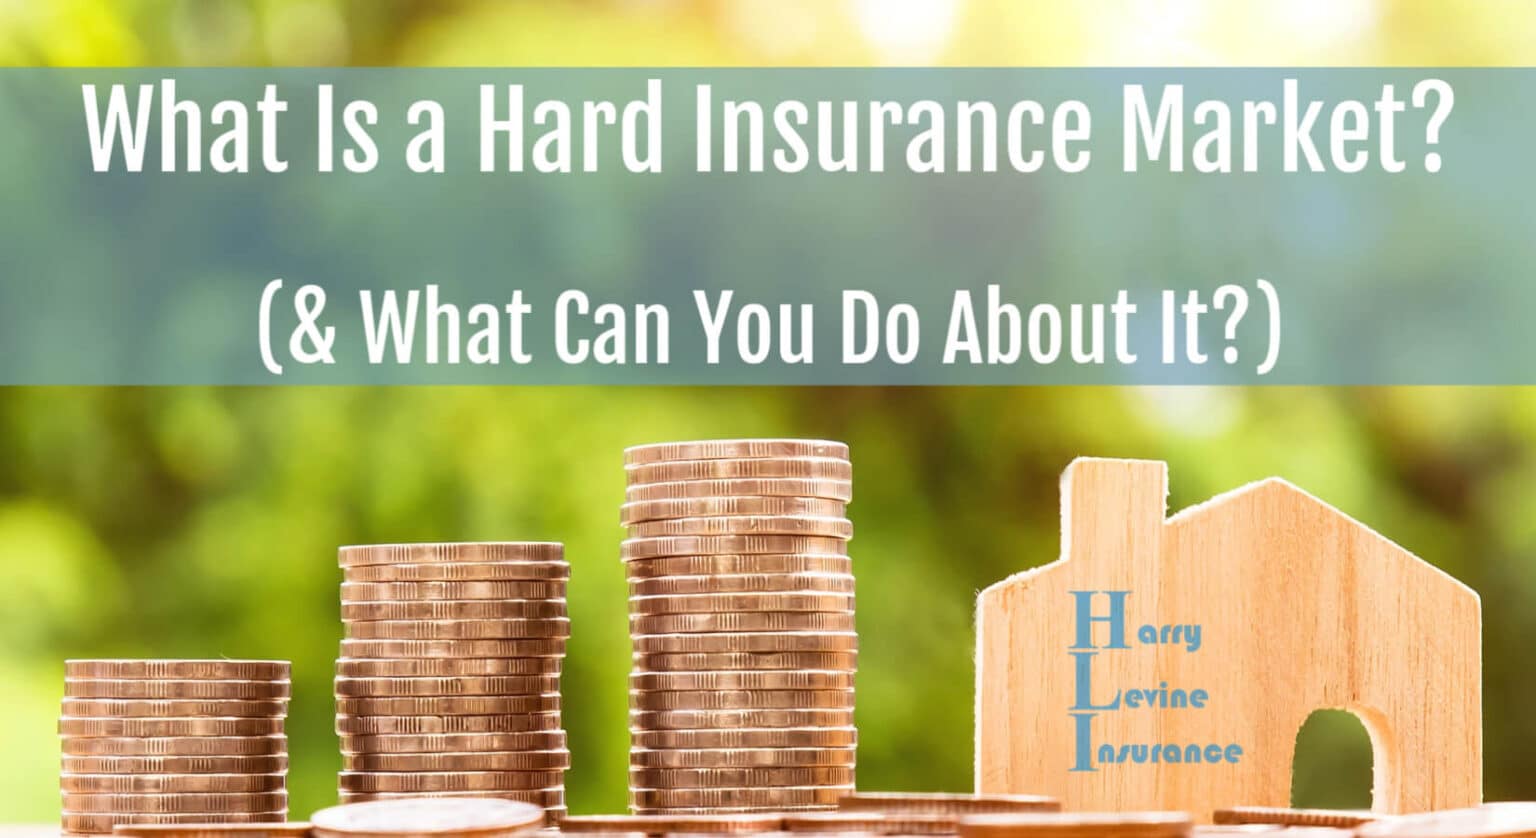 What Is A Hard Insurance Market? Harry Levine Insurance